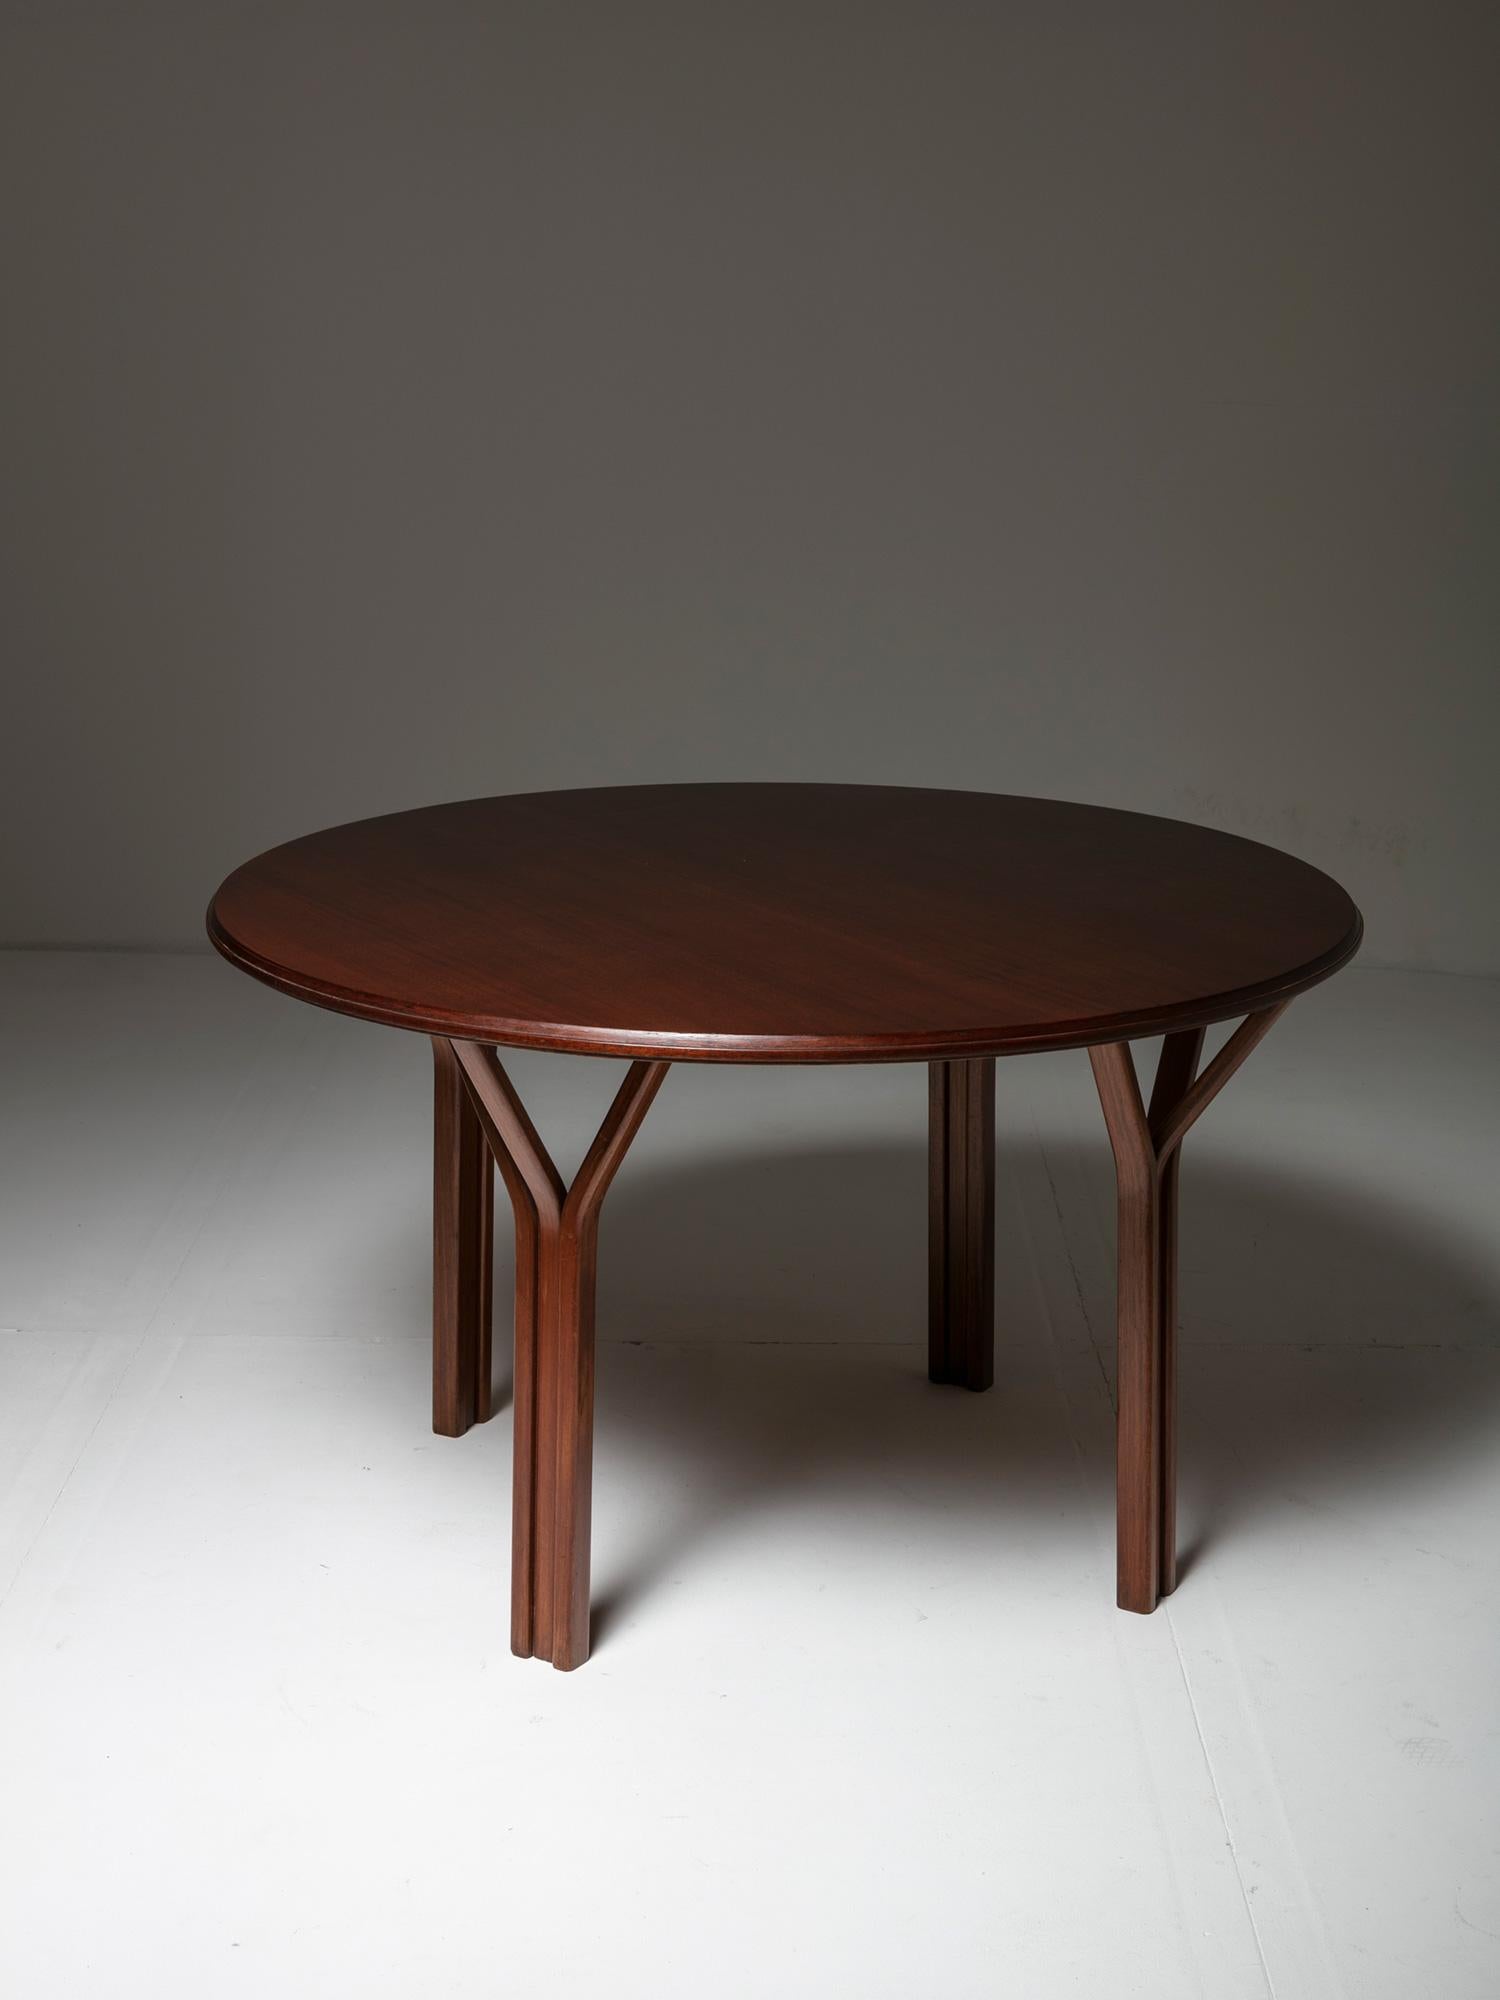 Table by Vittorio Gregotti, Lodovico Meneghetti and Giotto Stoppino for SIM, Novara.
Round top is supported by four legs opening in three parts reminding a tree trunk.